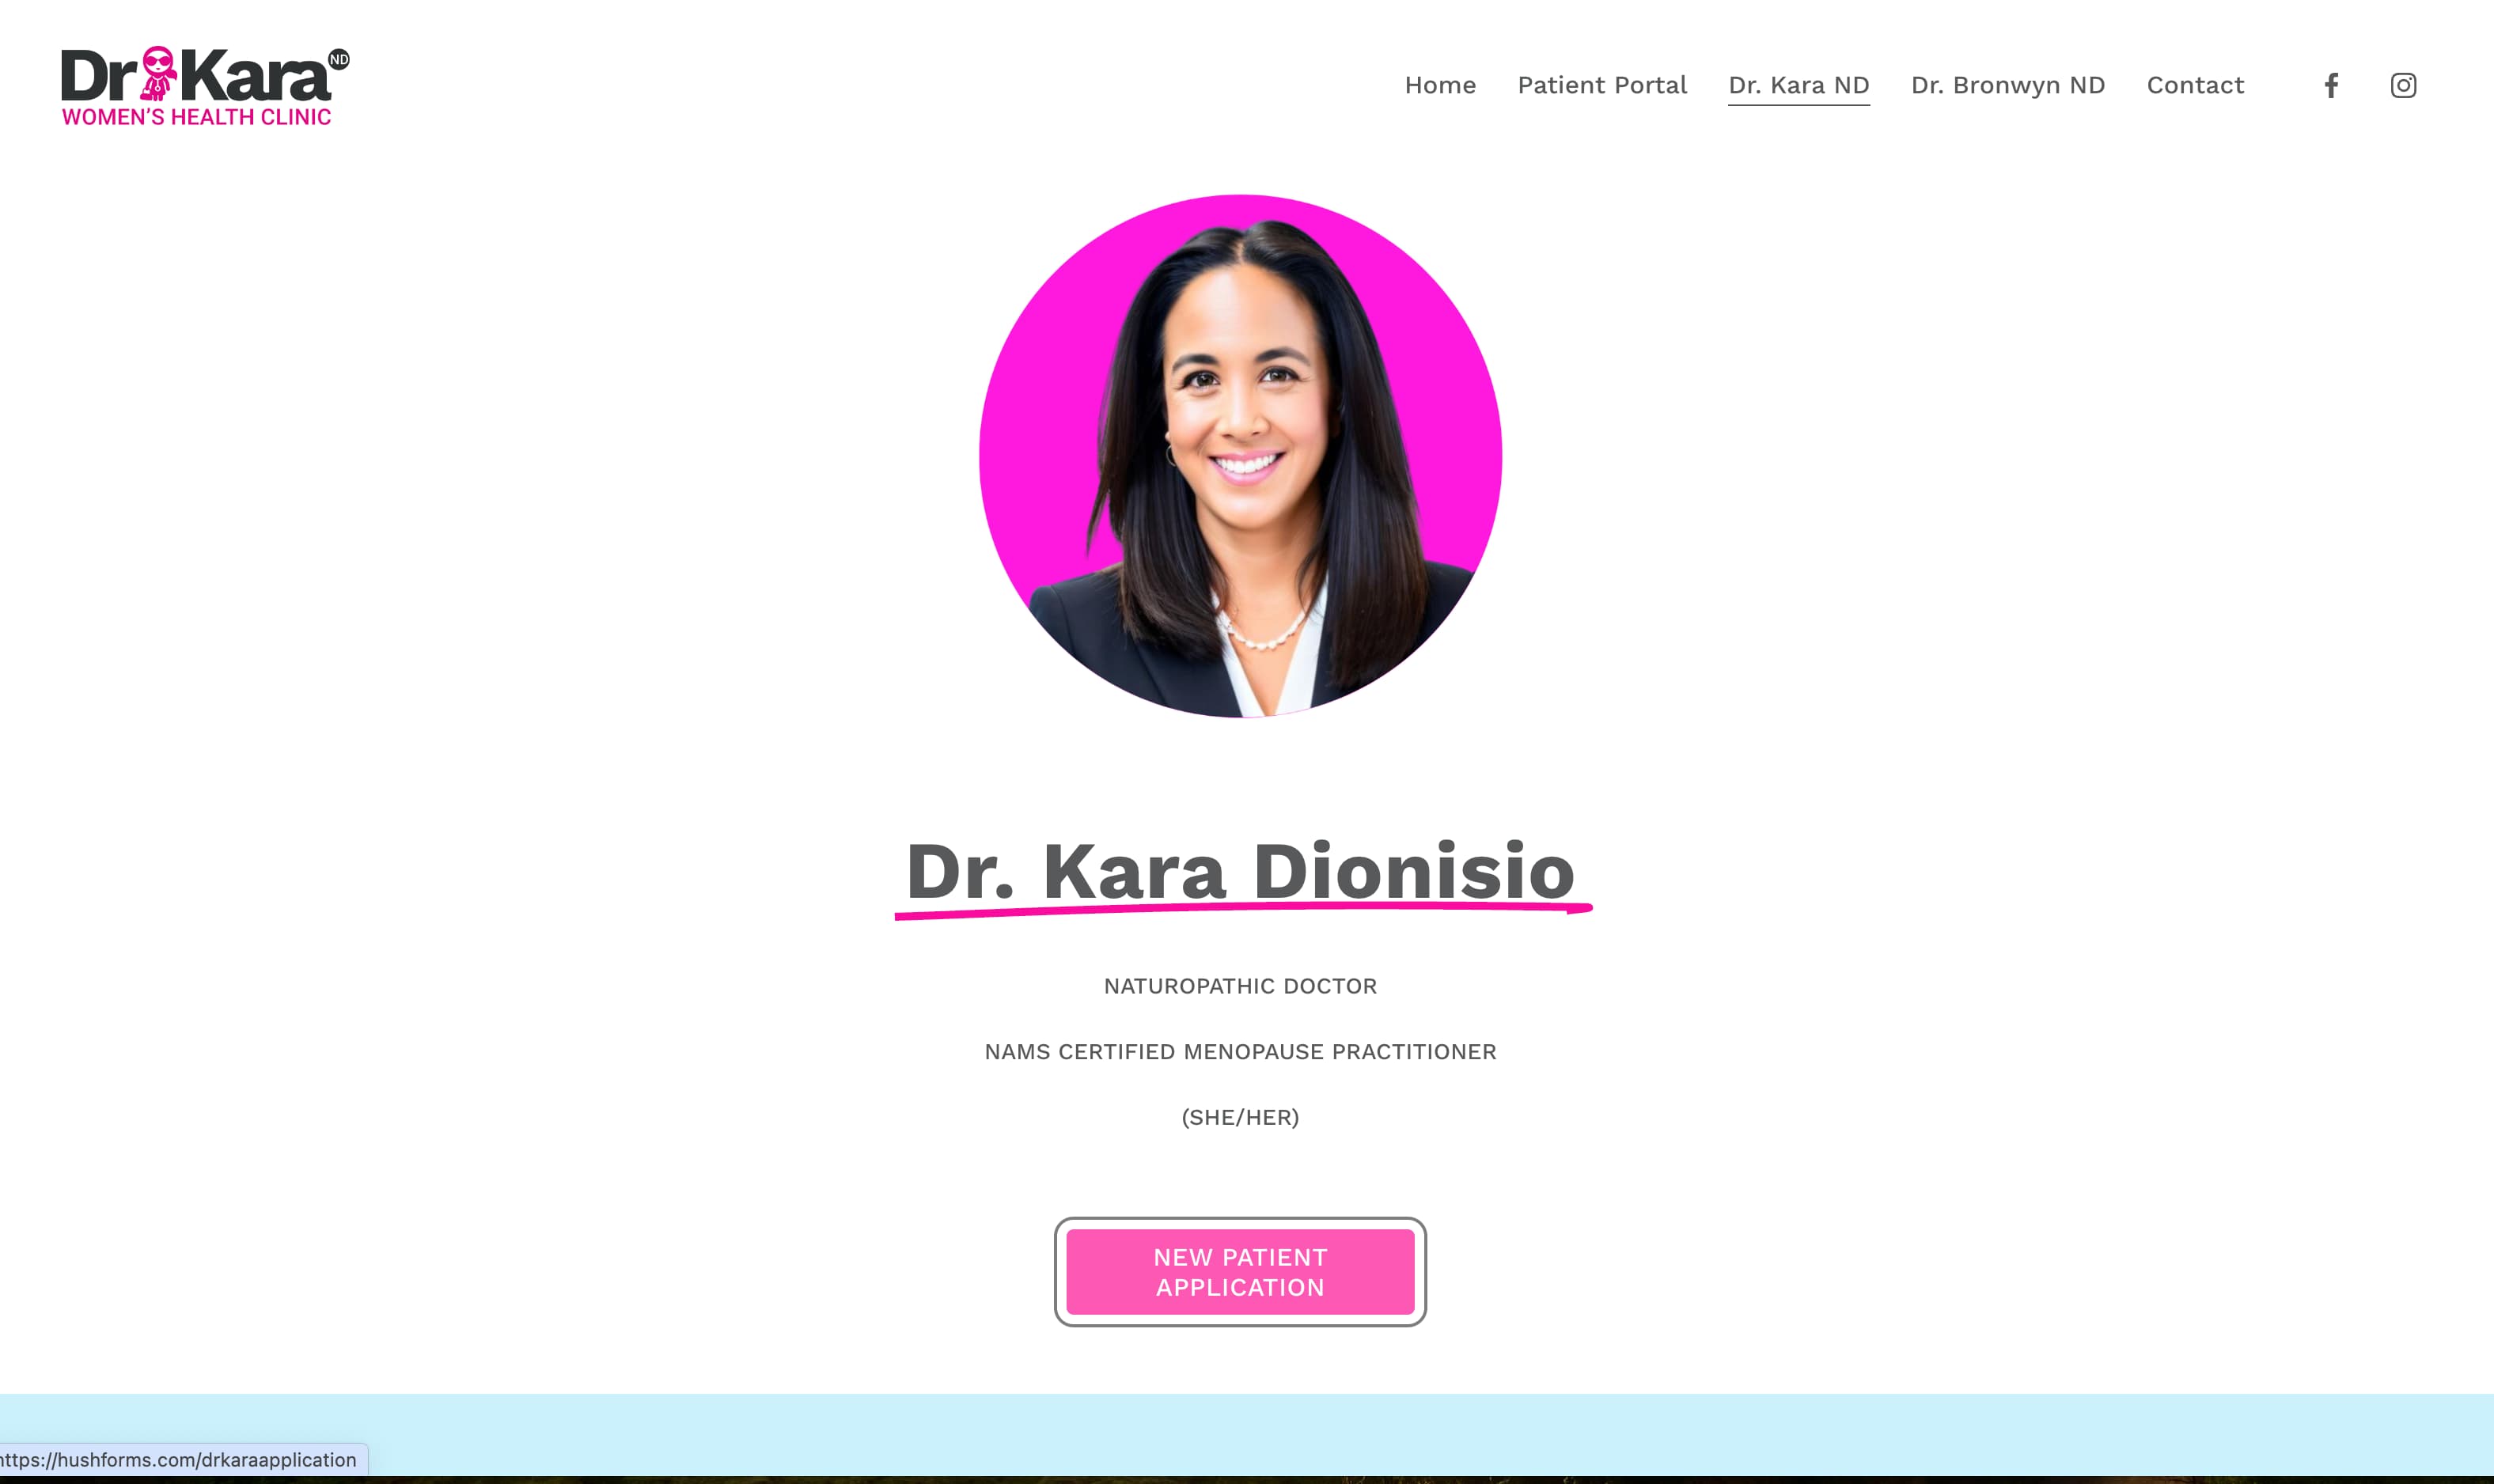 Dr. Kara Dionisio uses Hushmail for New Patient Applications